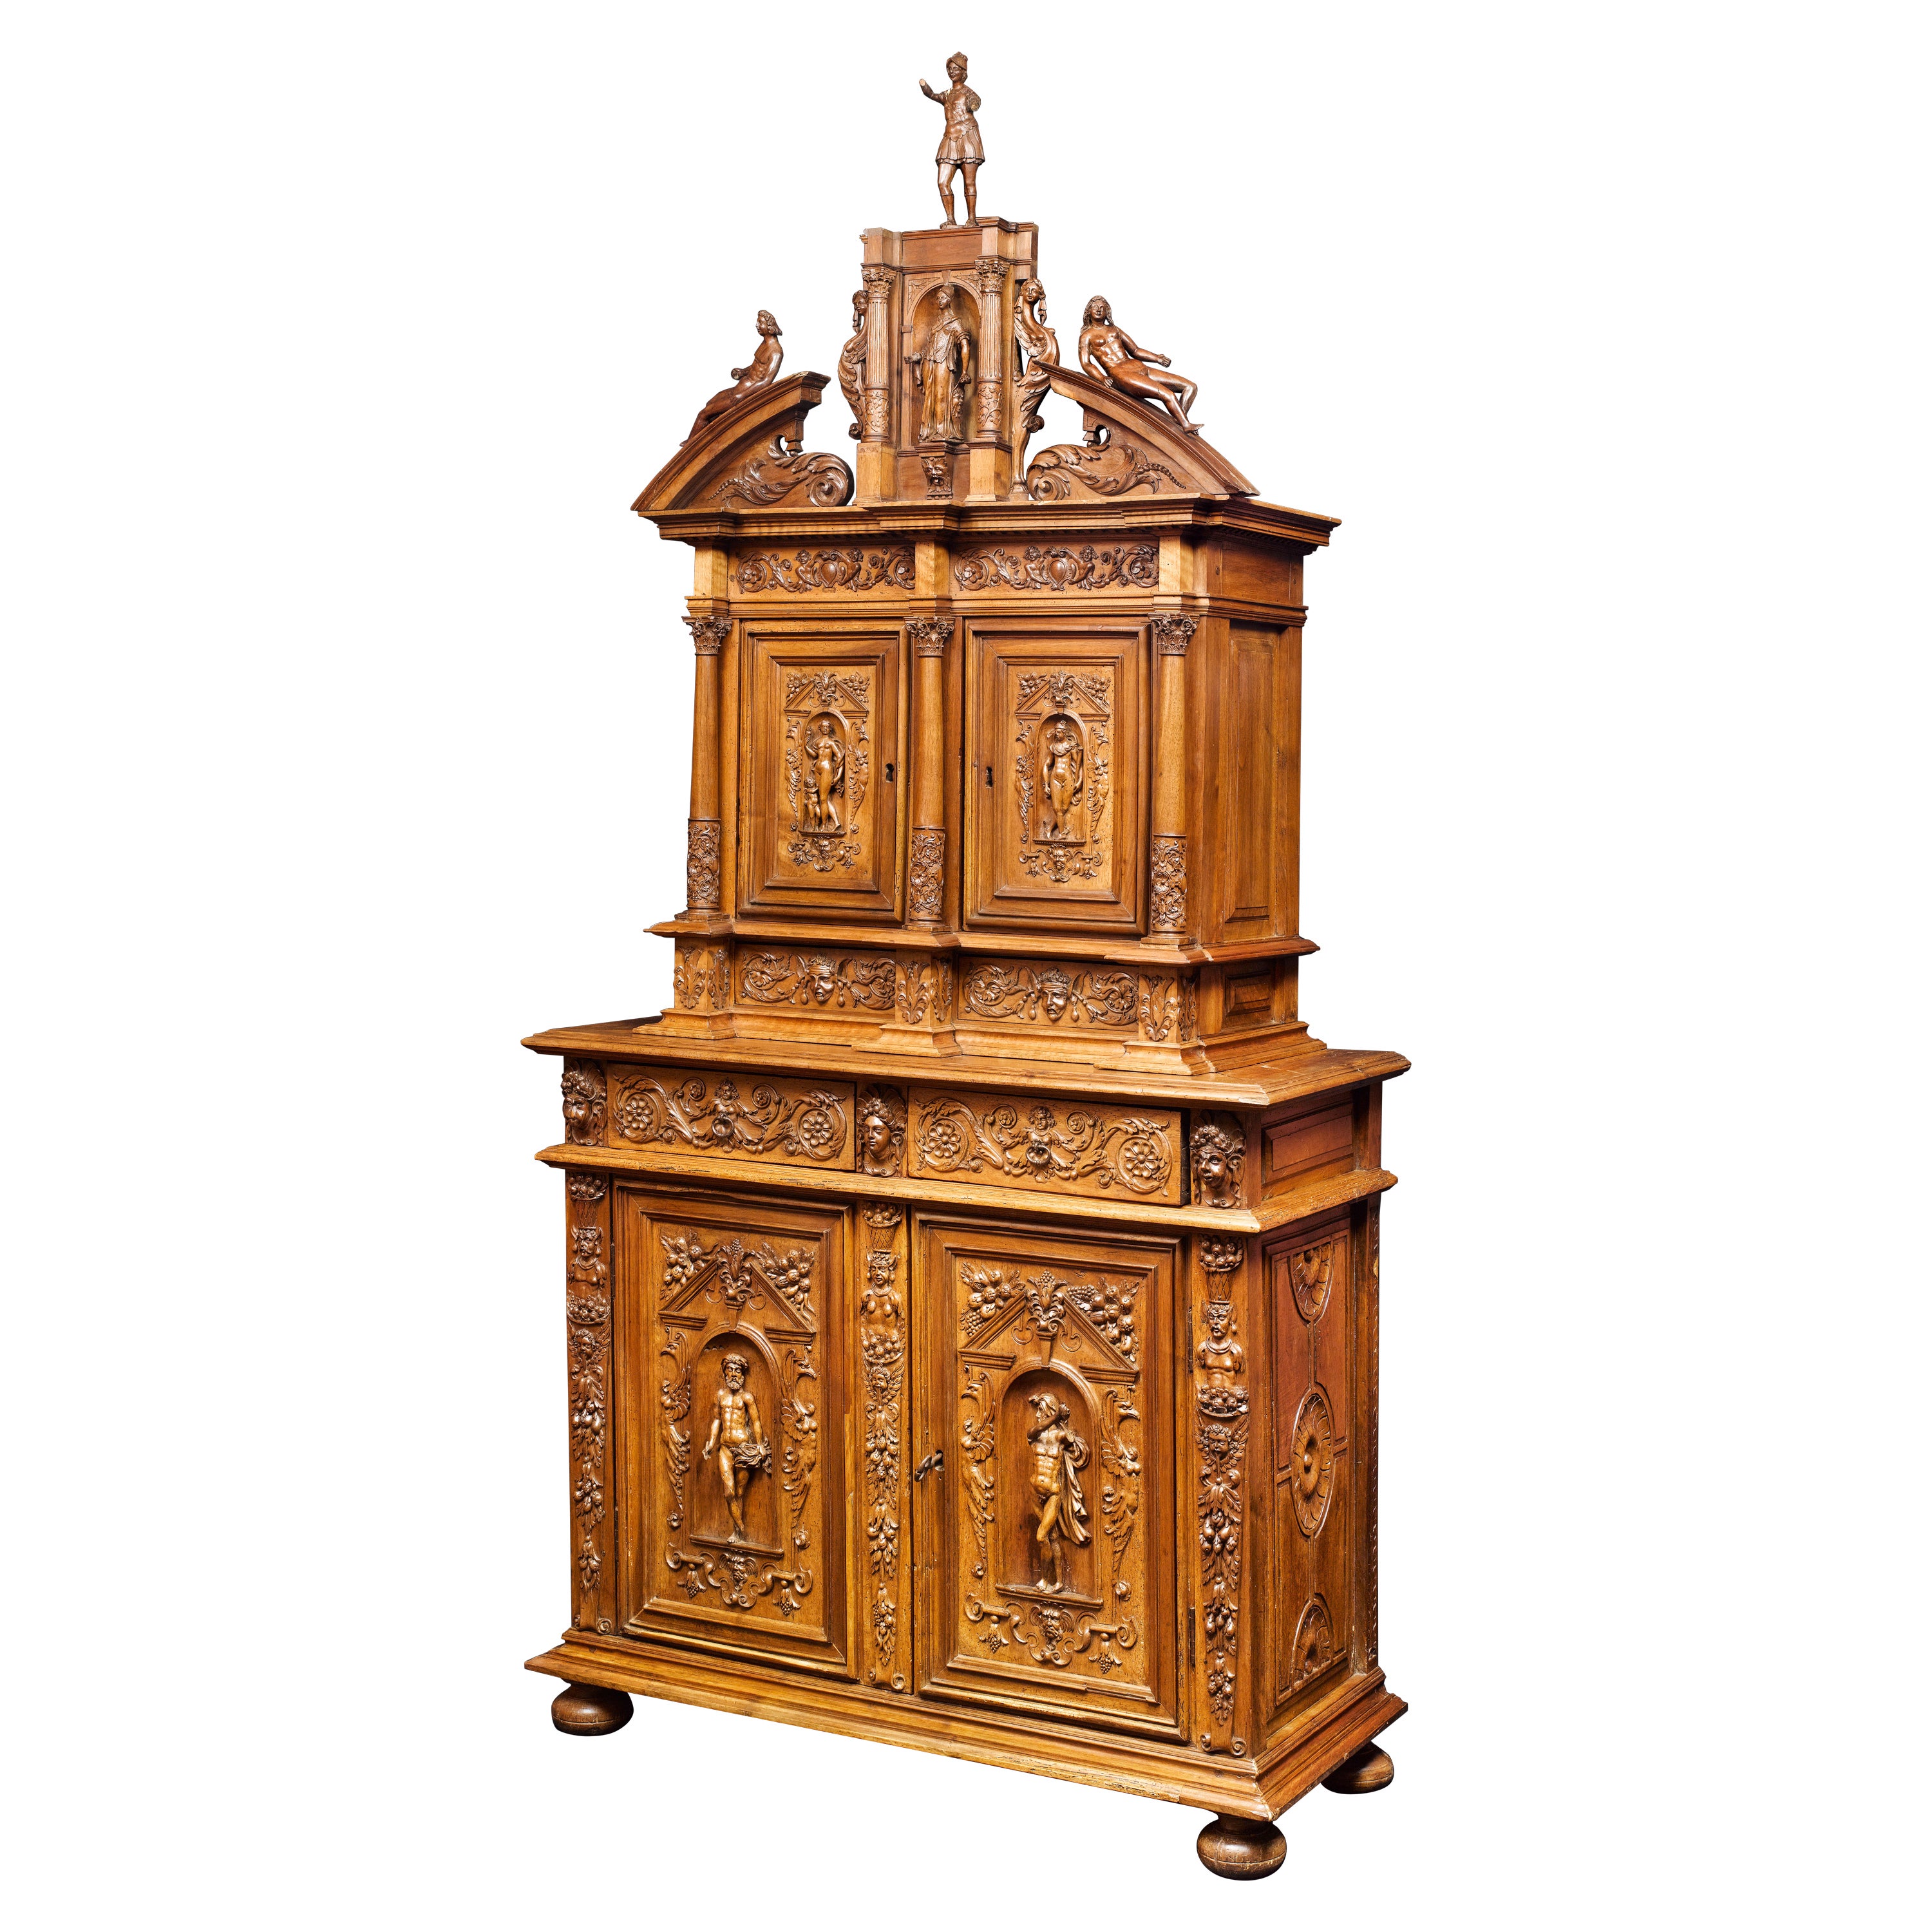 Renaissance Cupboard from Loire Valley, 'France'